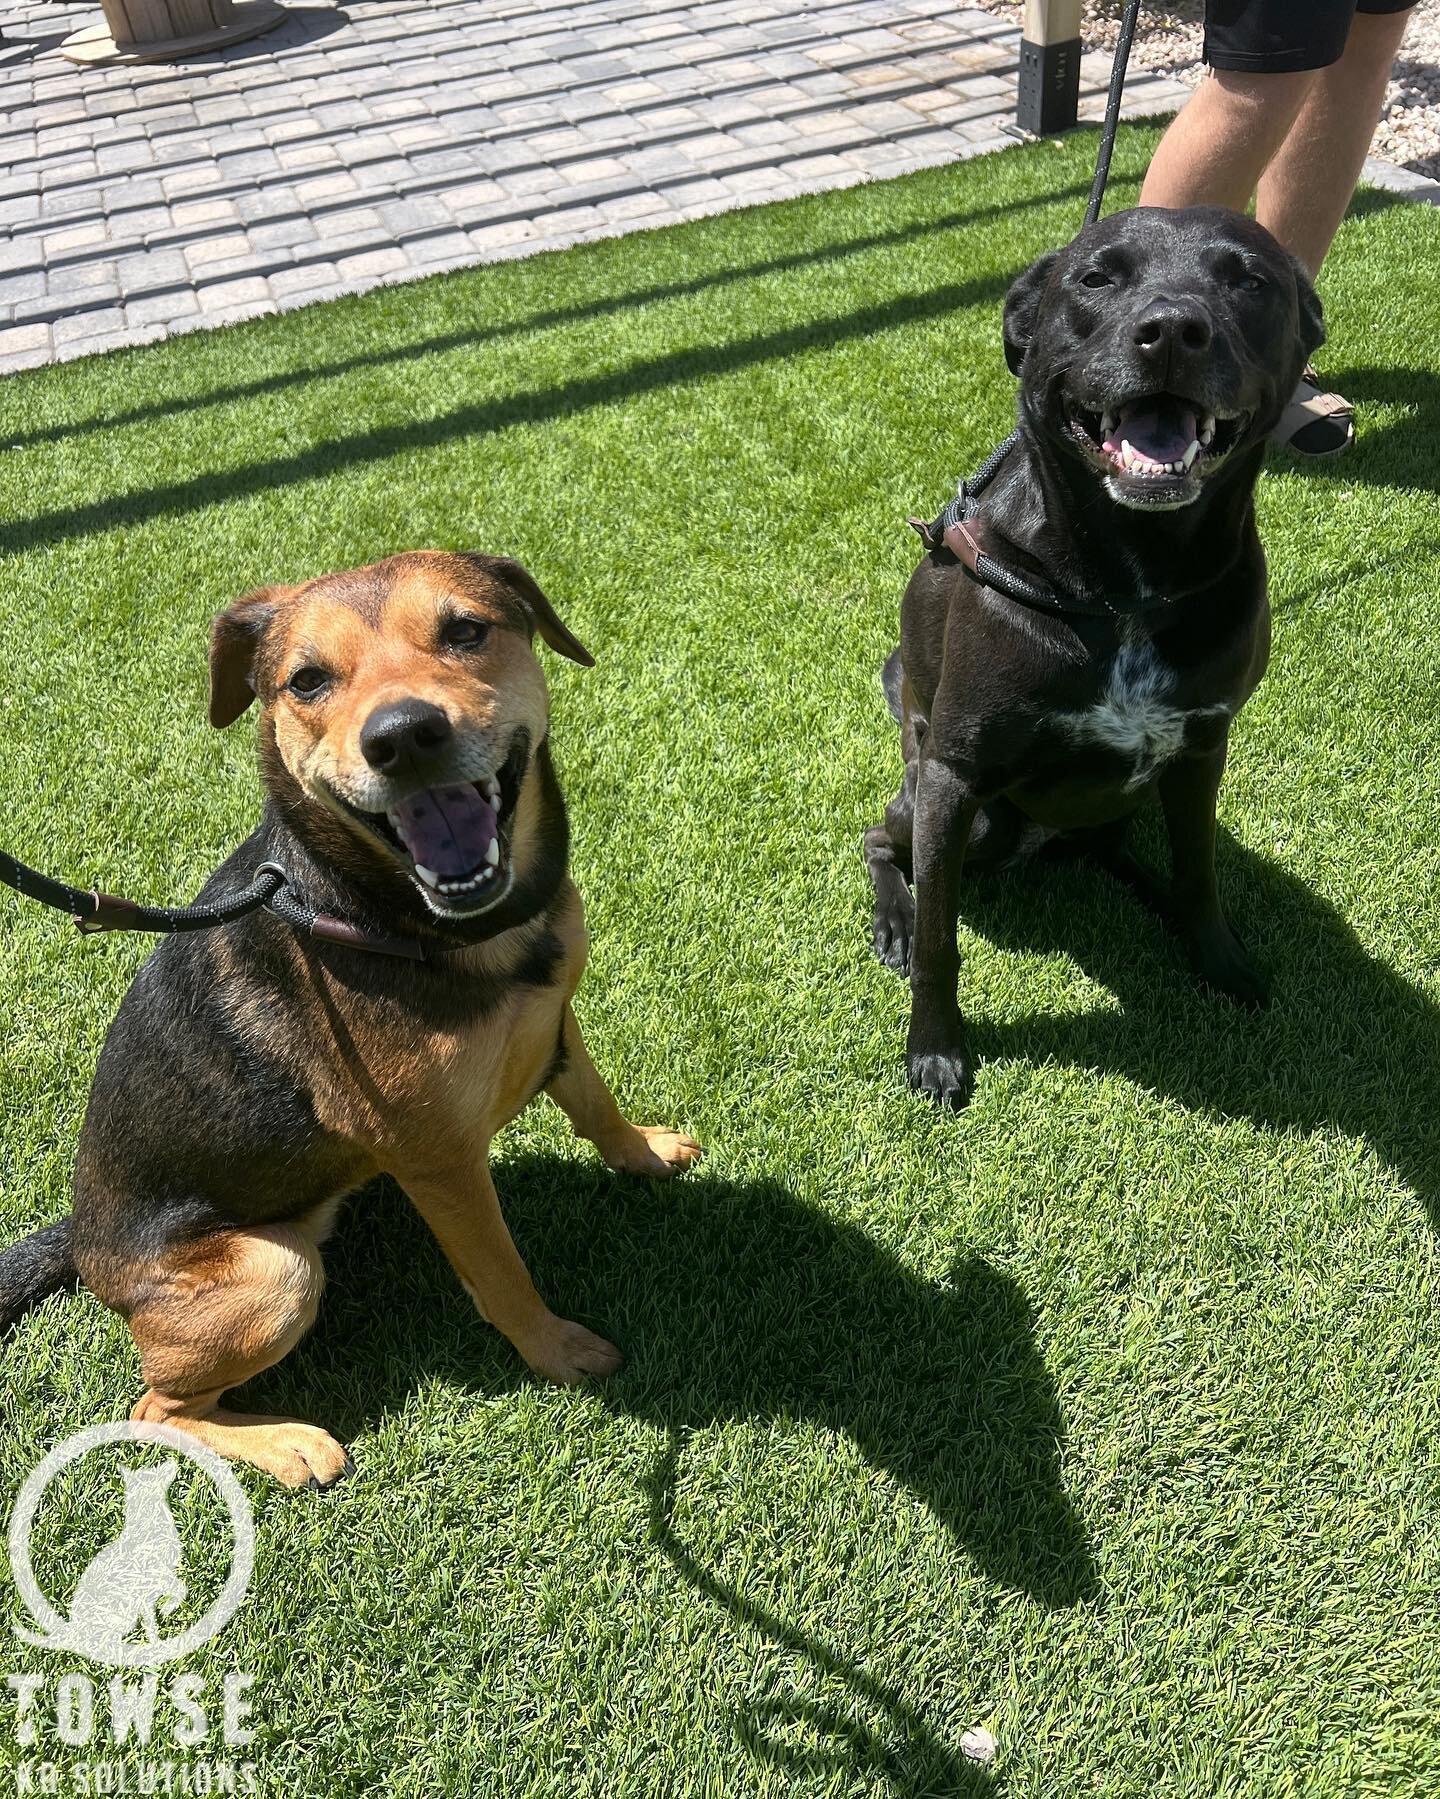 Cali (left) &amp; Kona (right) are our newest arrivals this week! Cali is here for 3 weeks of training while her sister Kona is here for some touch up and boarding. Kona did lessons with us a few years ago and now her sister needs a little more inten